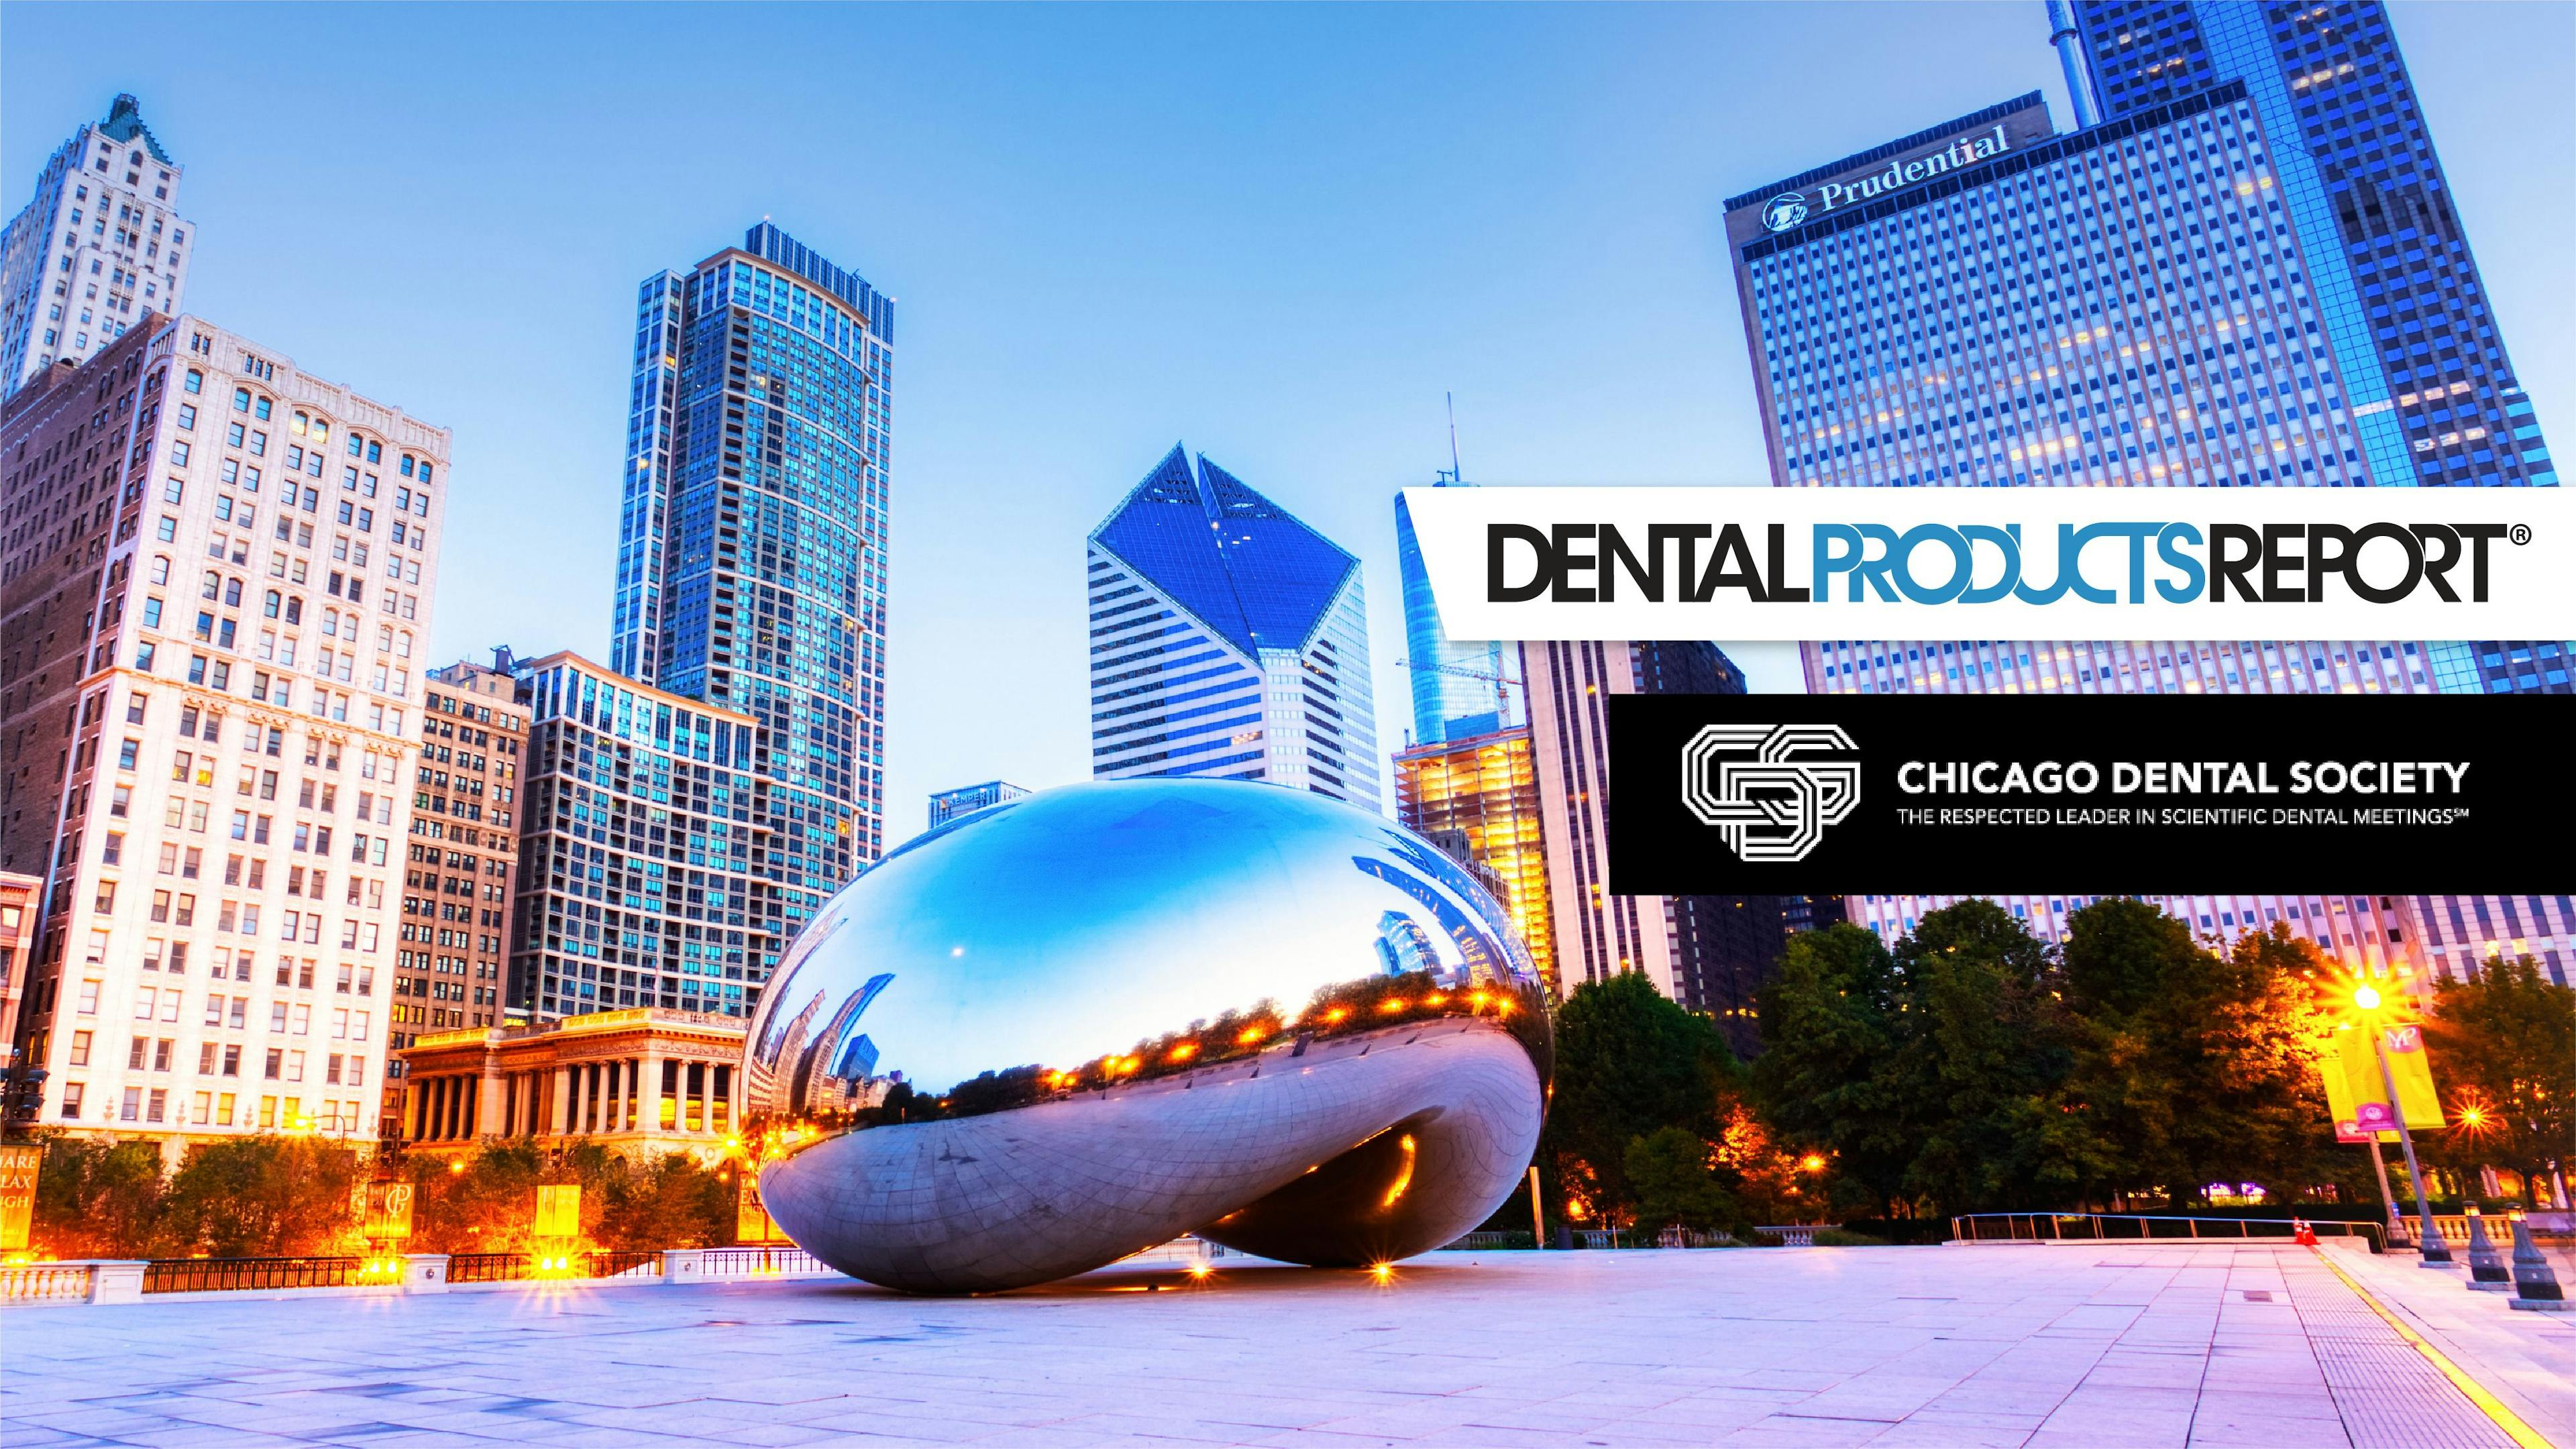 Day 2 at the 2022 Chicago Dental Society Midwinter Meeting